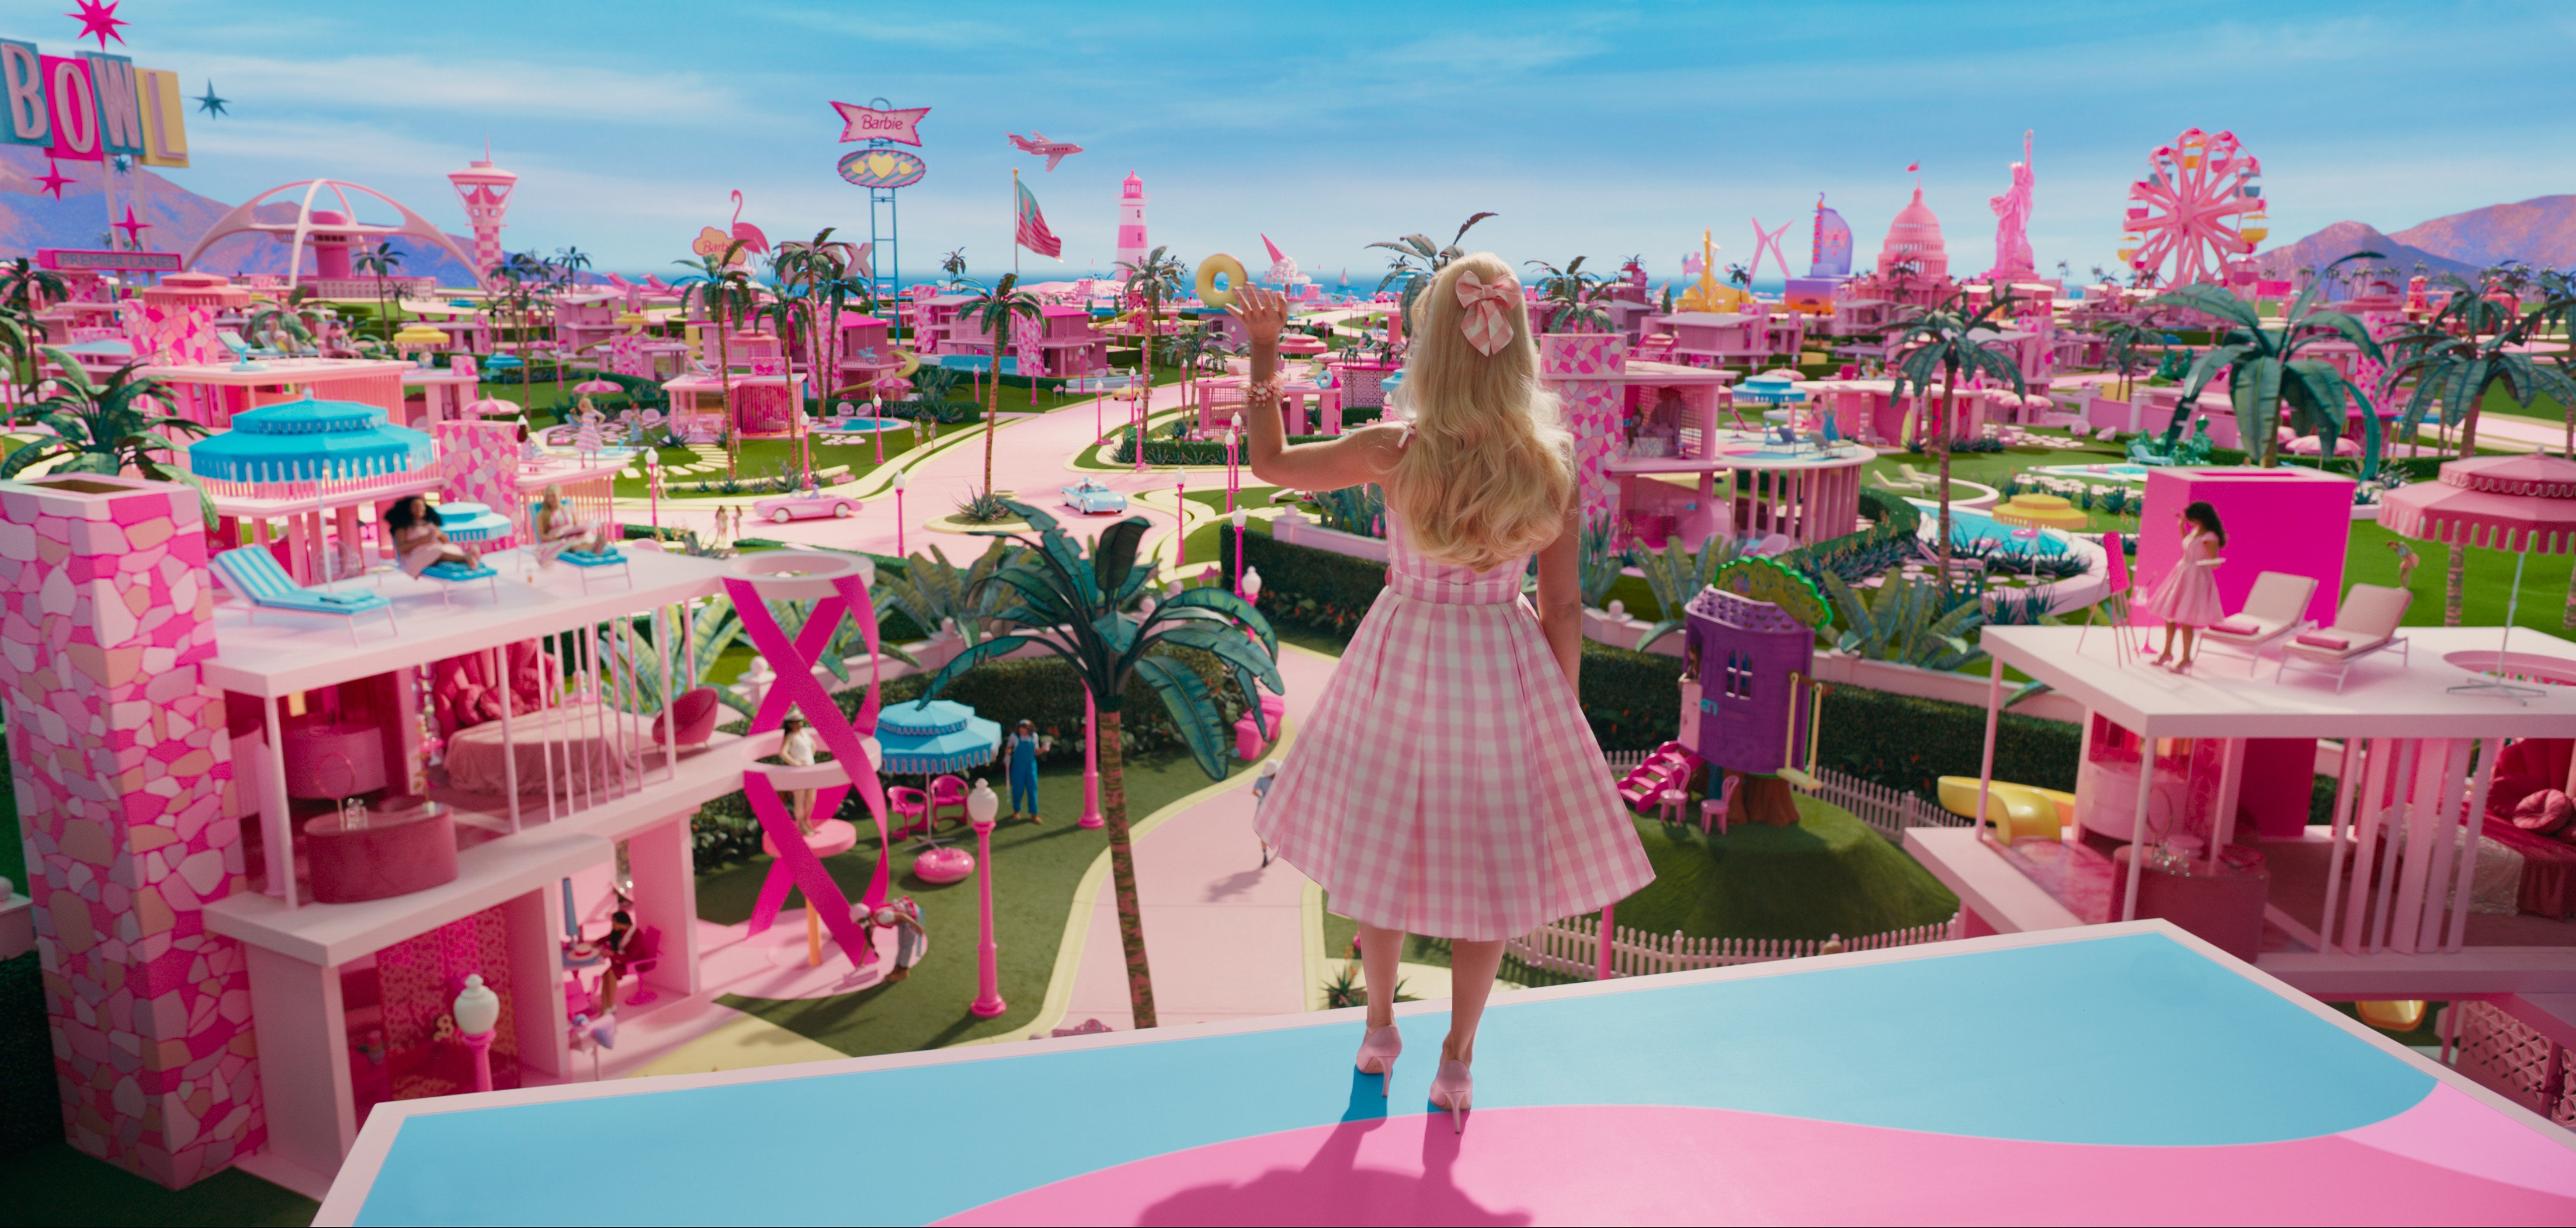 Did You Catch These Easter Eggs in the Barbie Movie Trailer?